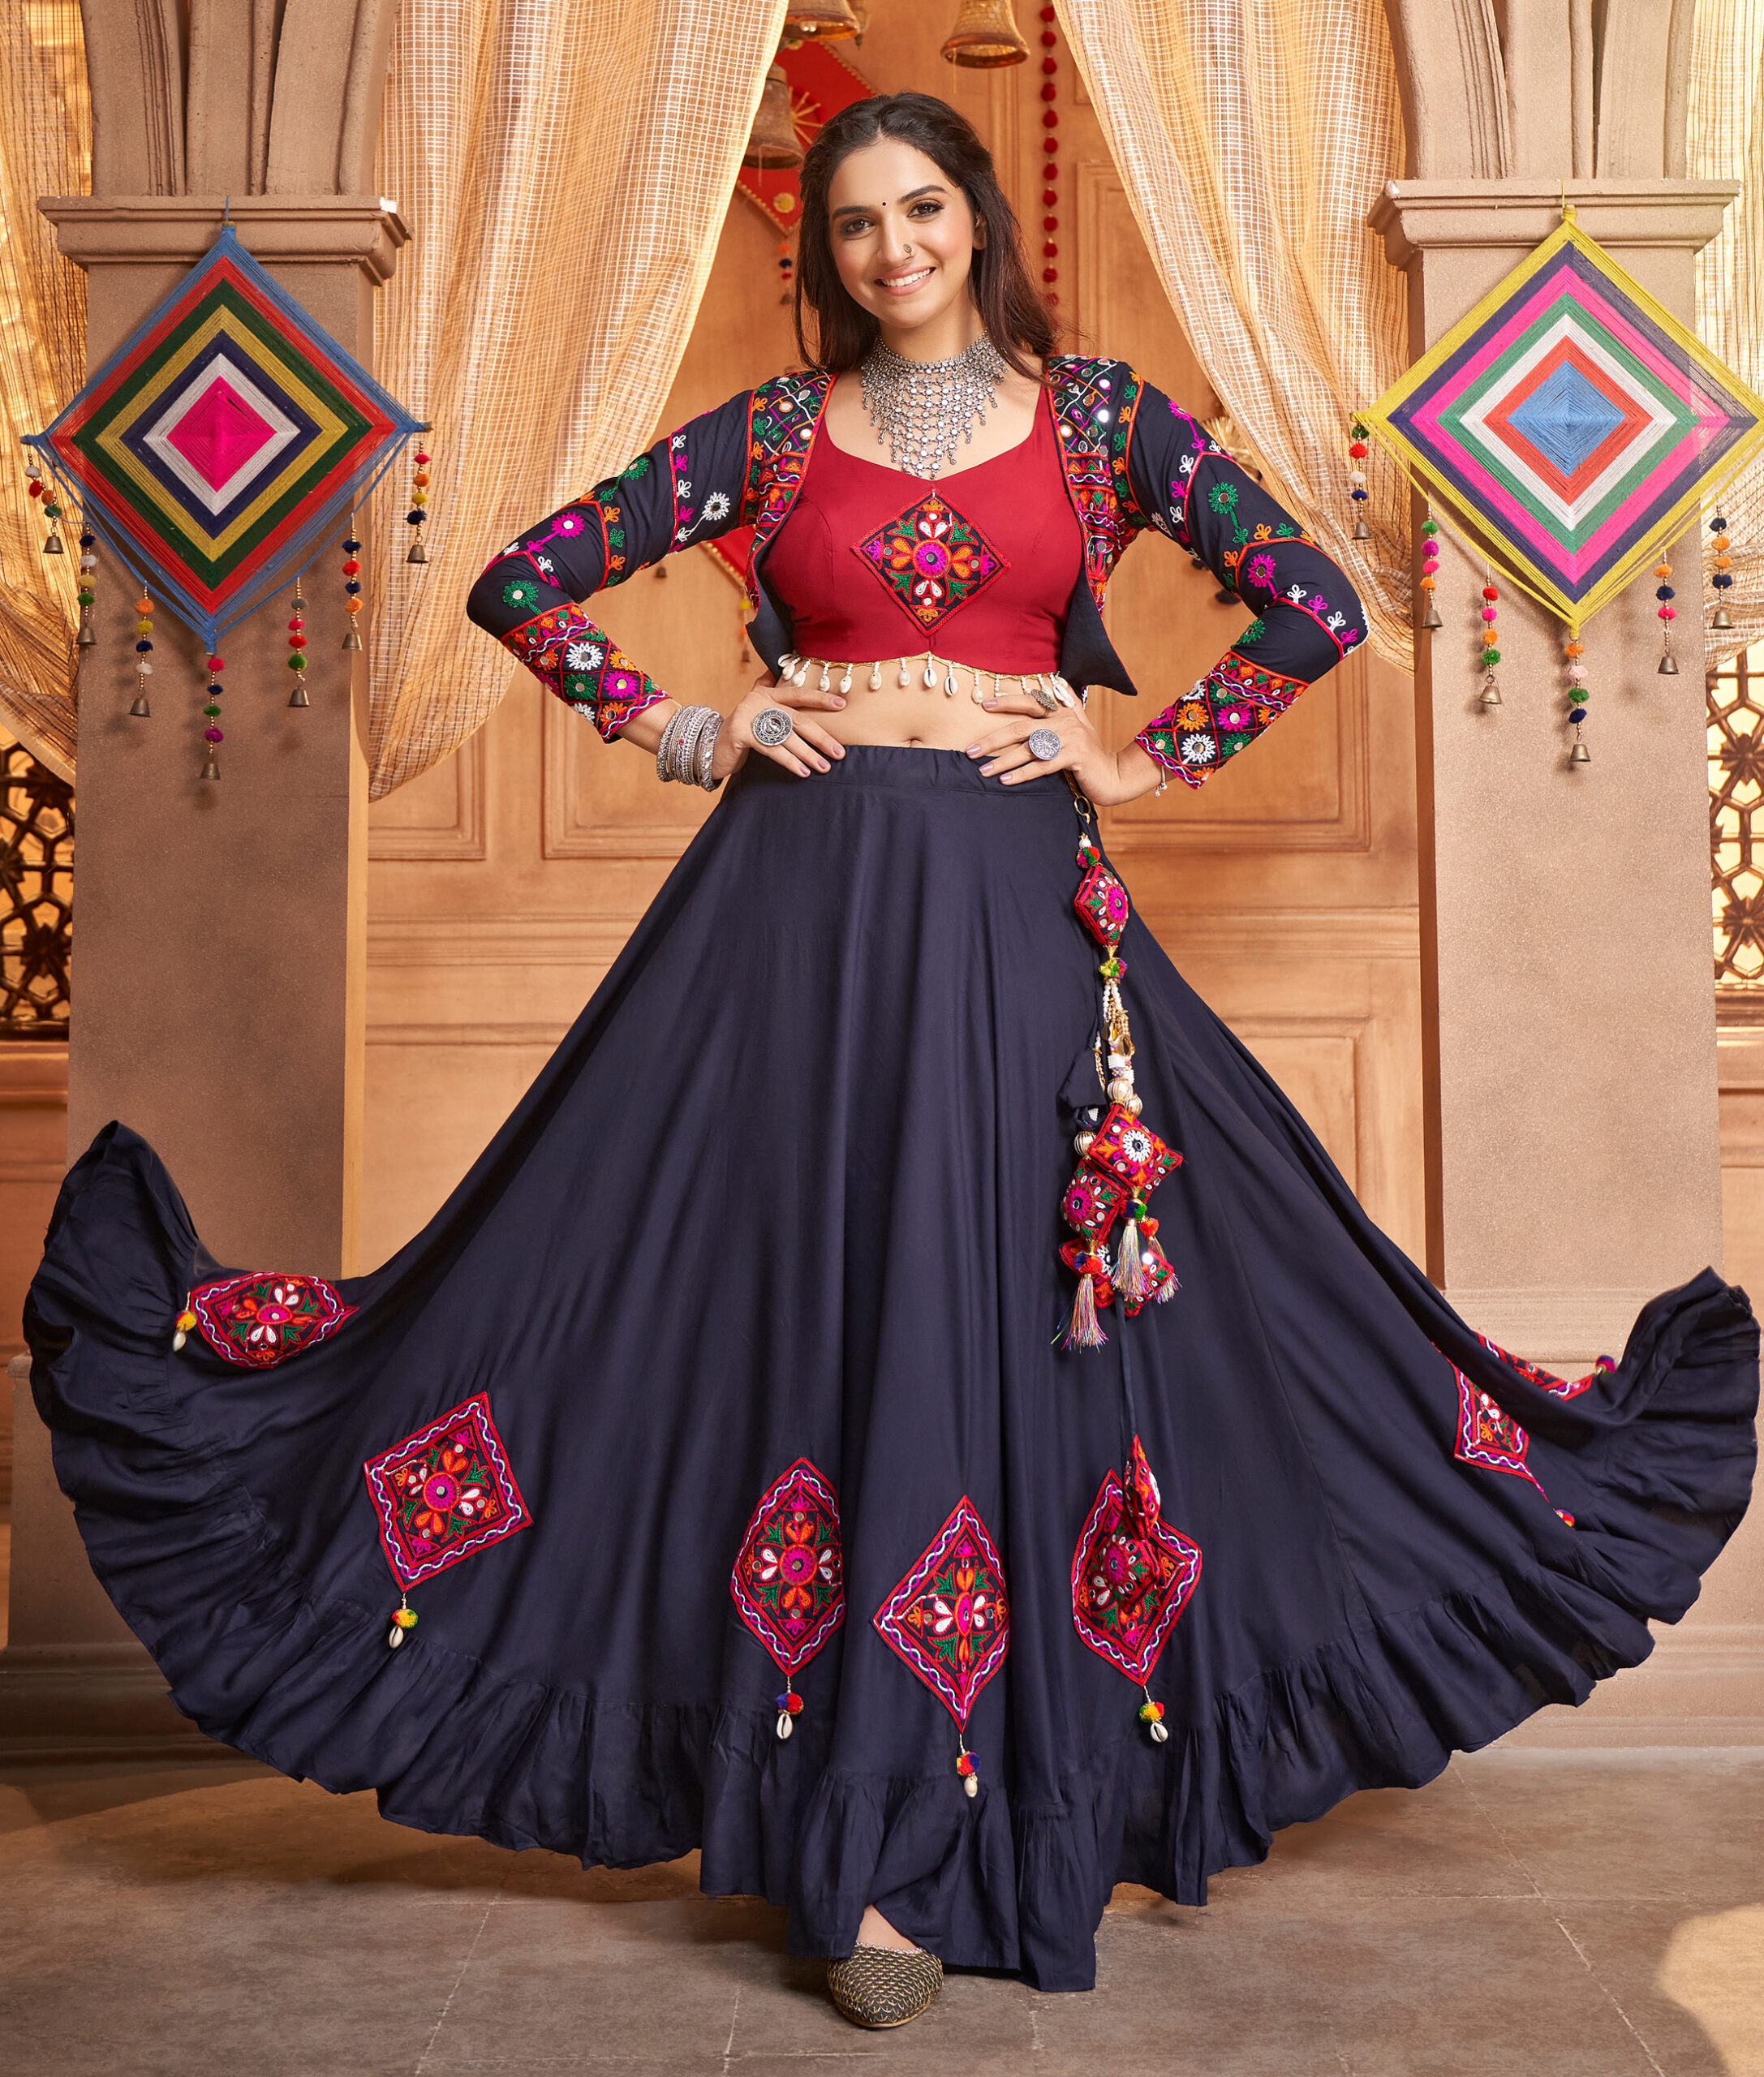 Plus Size Dresses for sale in Ahmedabad, India